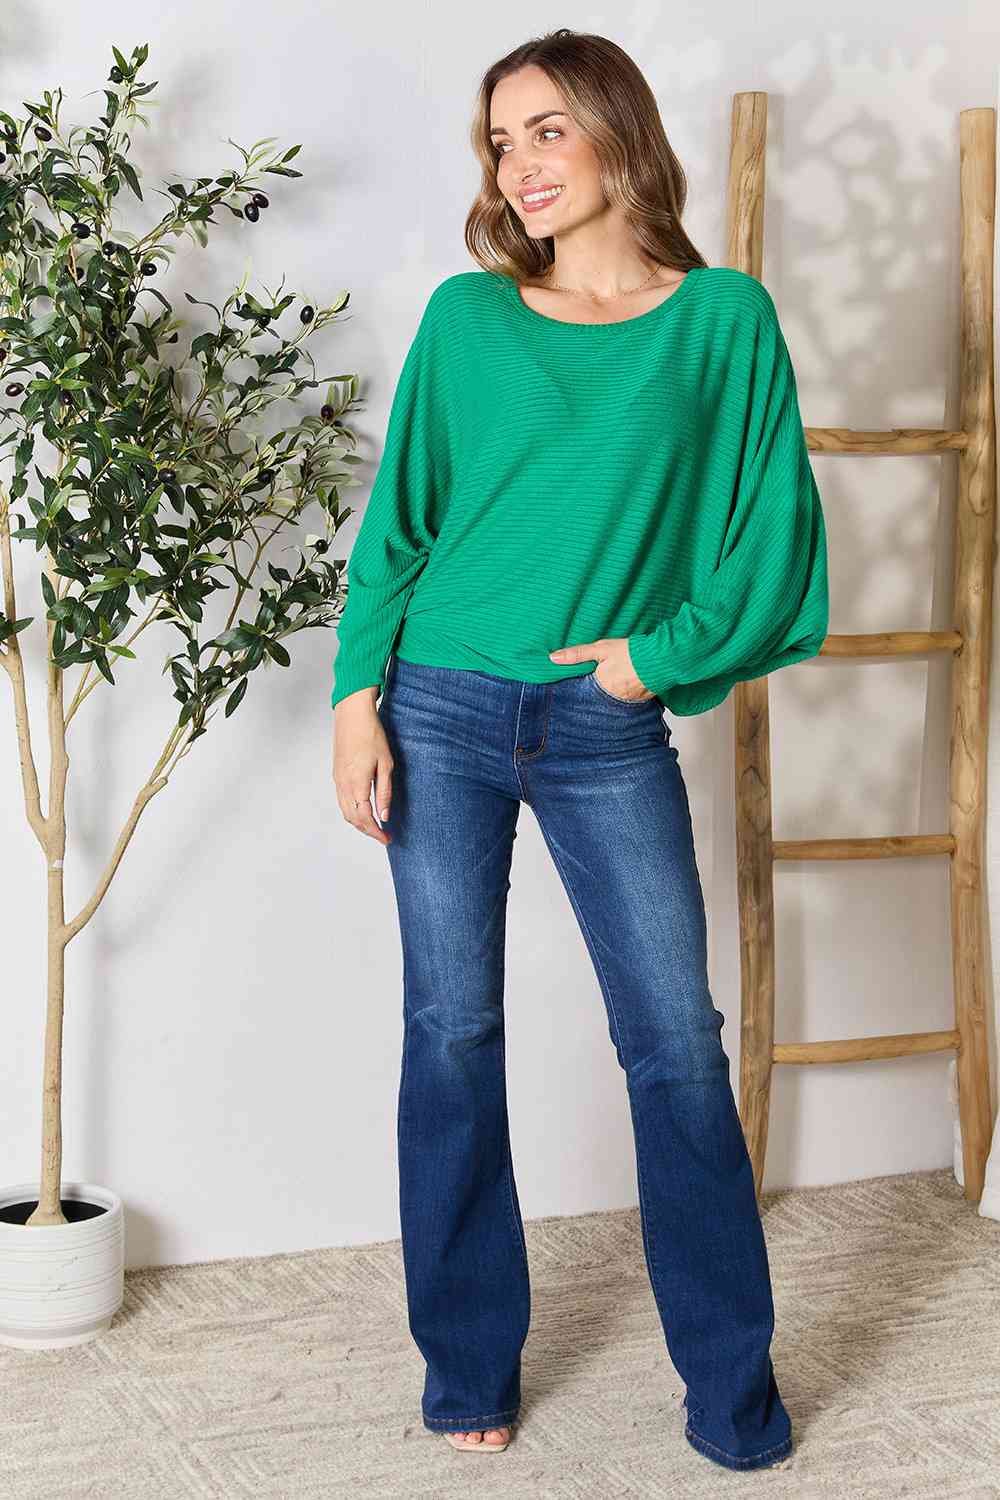 Ribbed Batwing Long Sleeve Boat Neck Sweater